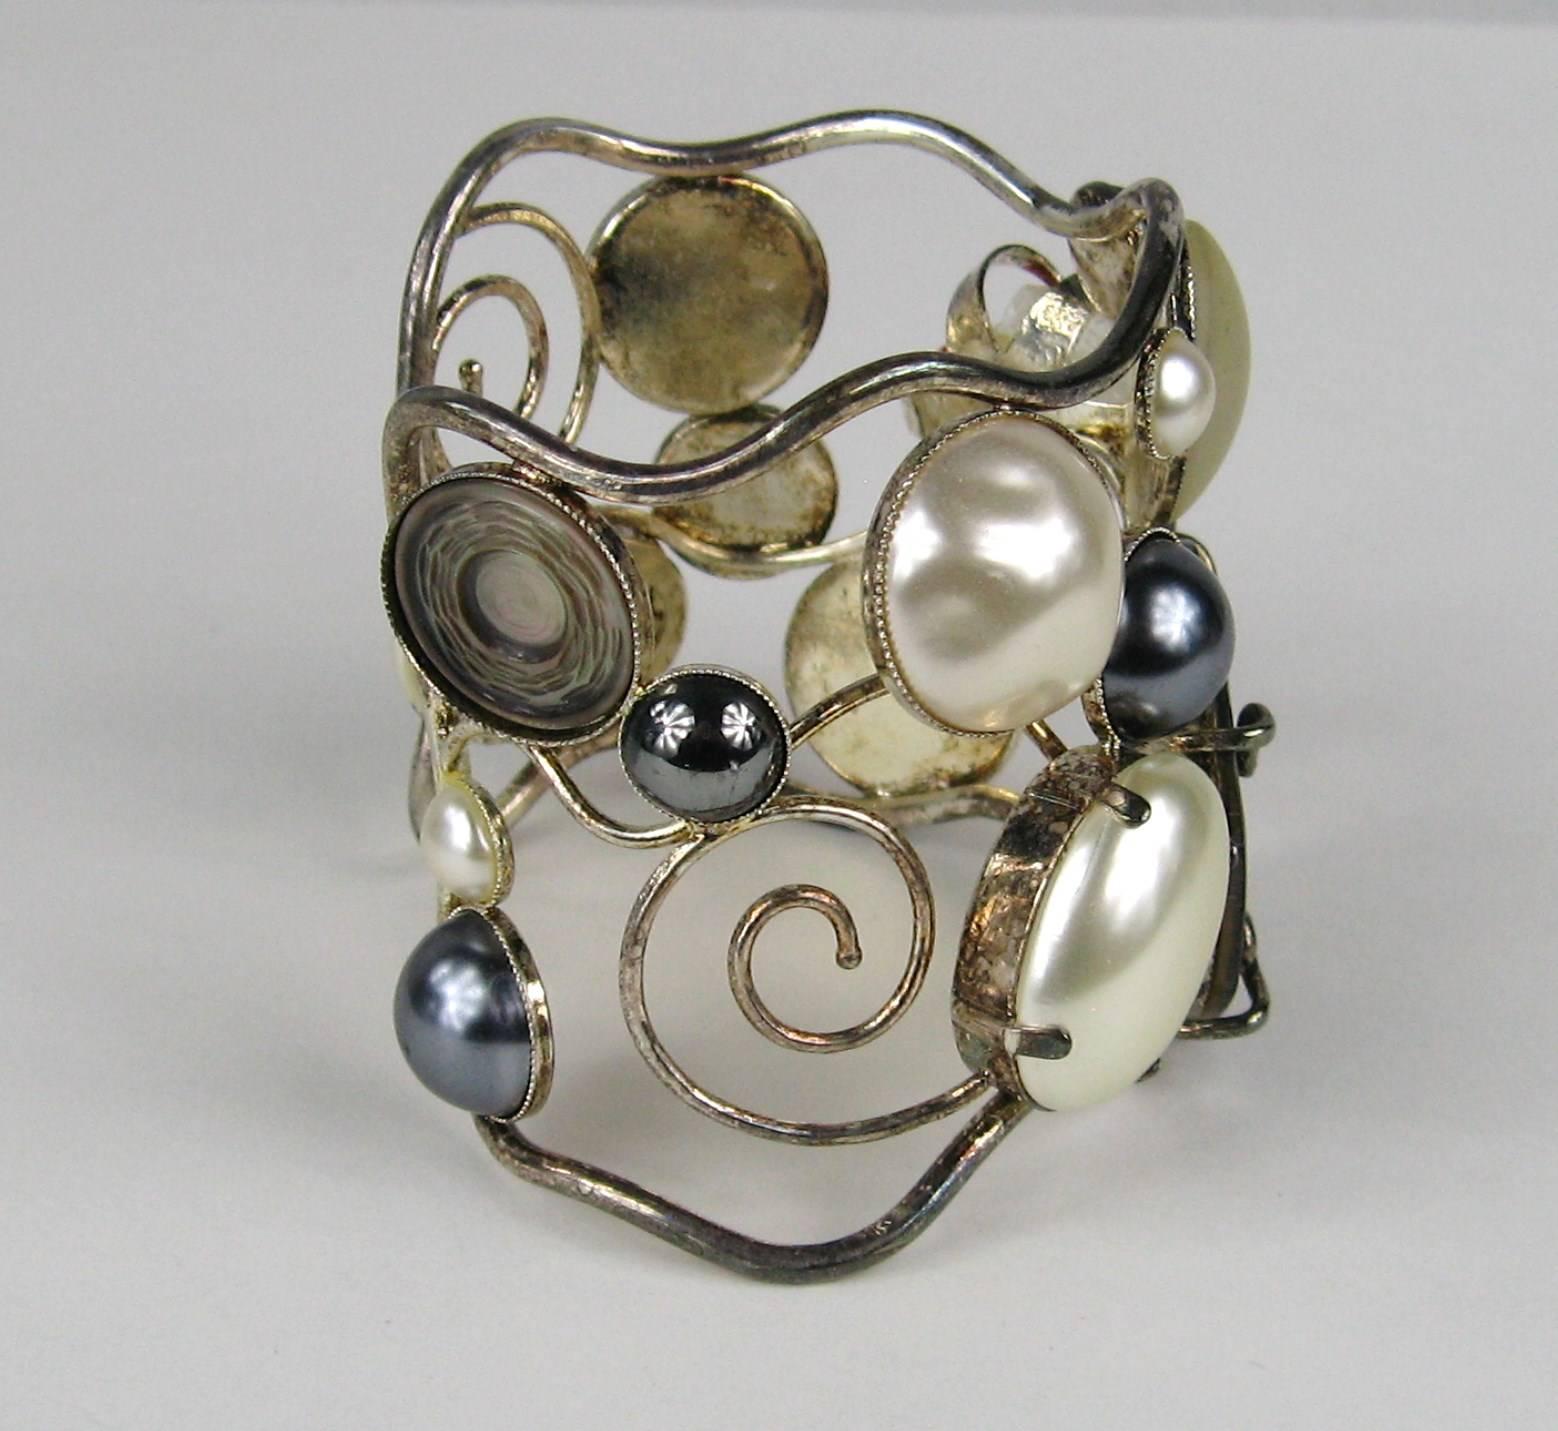 Stunning array of Mabe pearls, crystal and mother of pearl discs. Made in France. Bezel and prong set. Large oversized Cuff. Measuring 2.44 in top to bottom.  Will fit a 6.5 to 7.5 wrist nicely. Can be adjusted a bit larger or smaller. This came